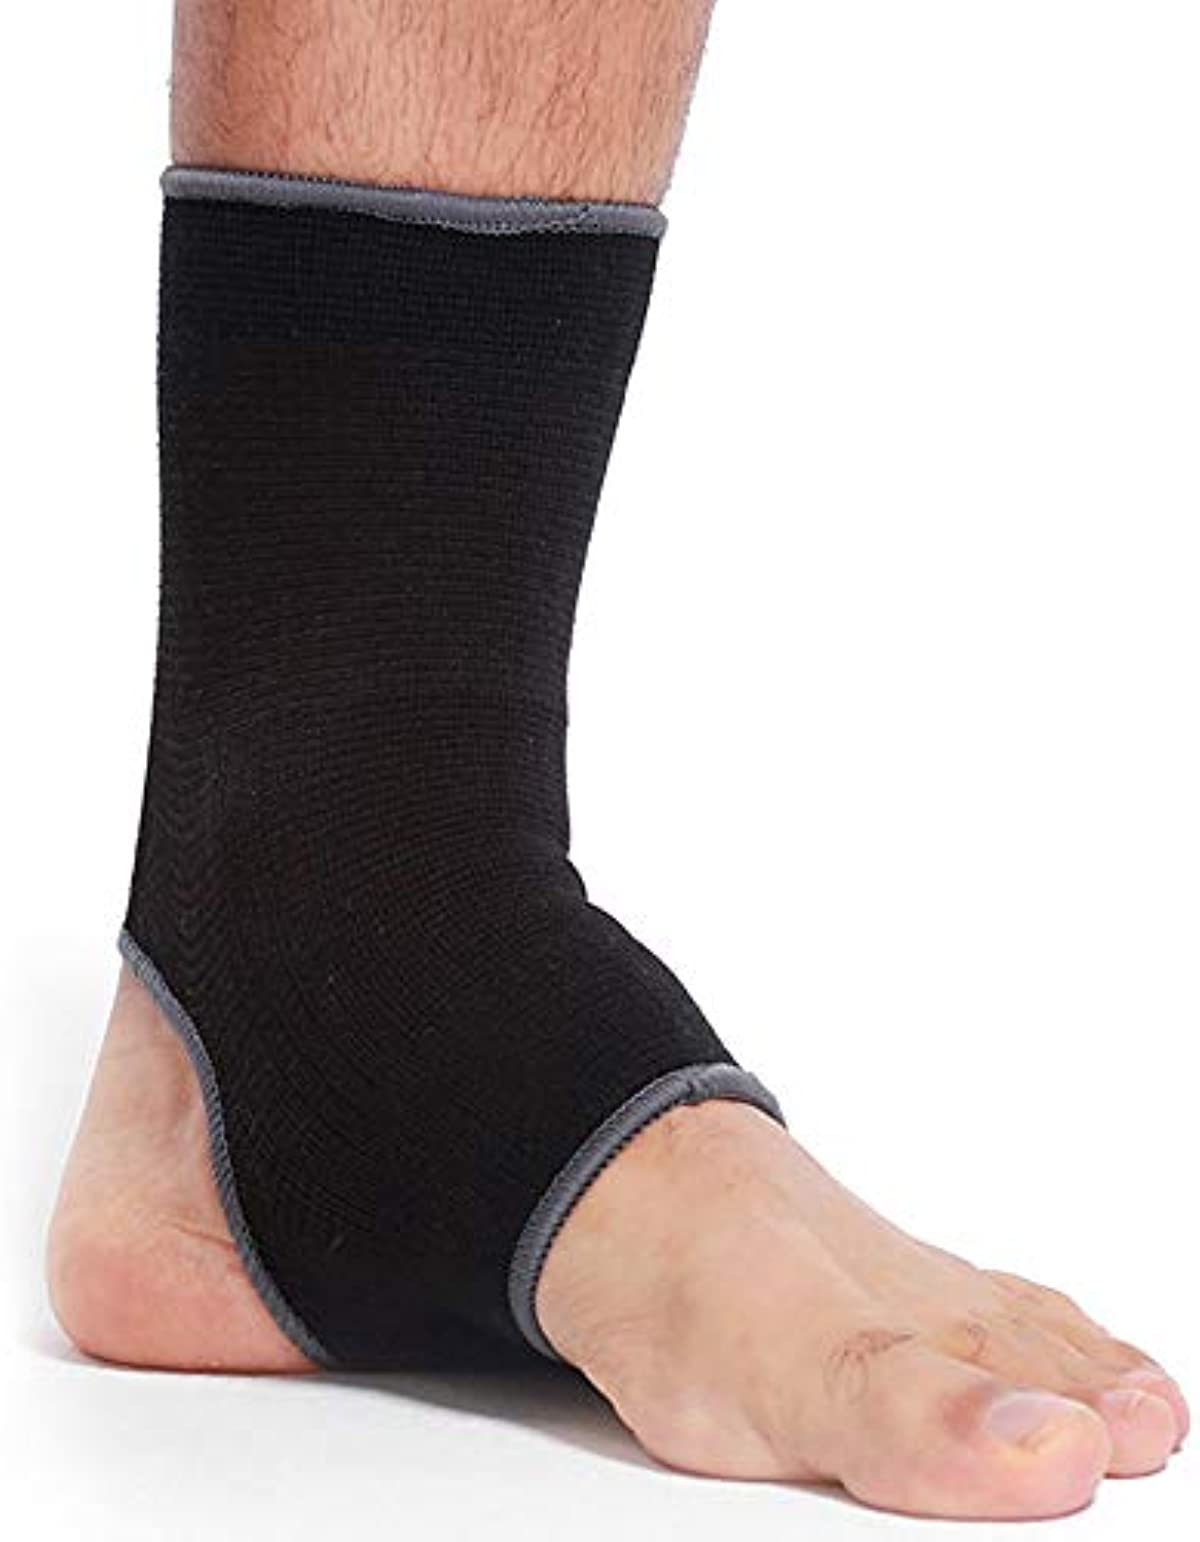 NEOTech Care Ankle Support Sleeve (1 Unit) - Open Heel, Light, Elastic & Breathable Knitted Fabric - Medium Compression - For Men, Women, Kids - Right or Left Foot - Black Color (Size S)